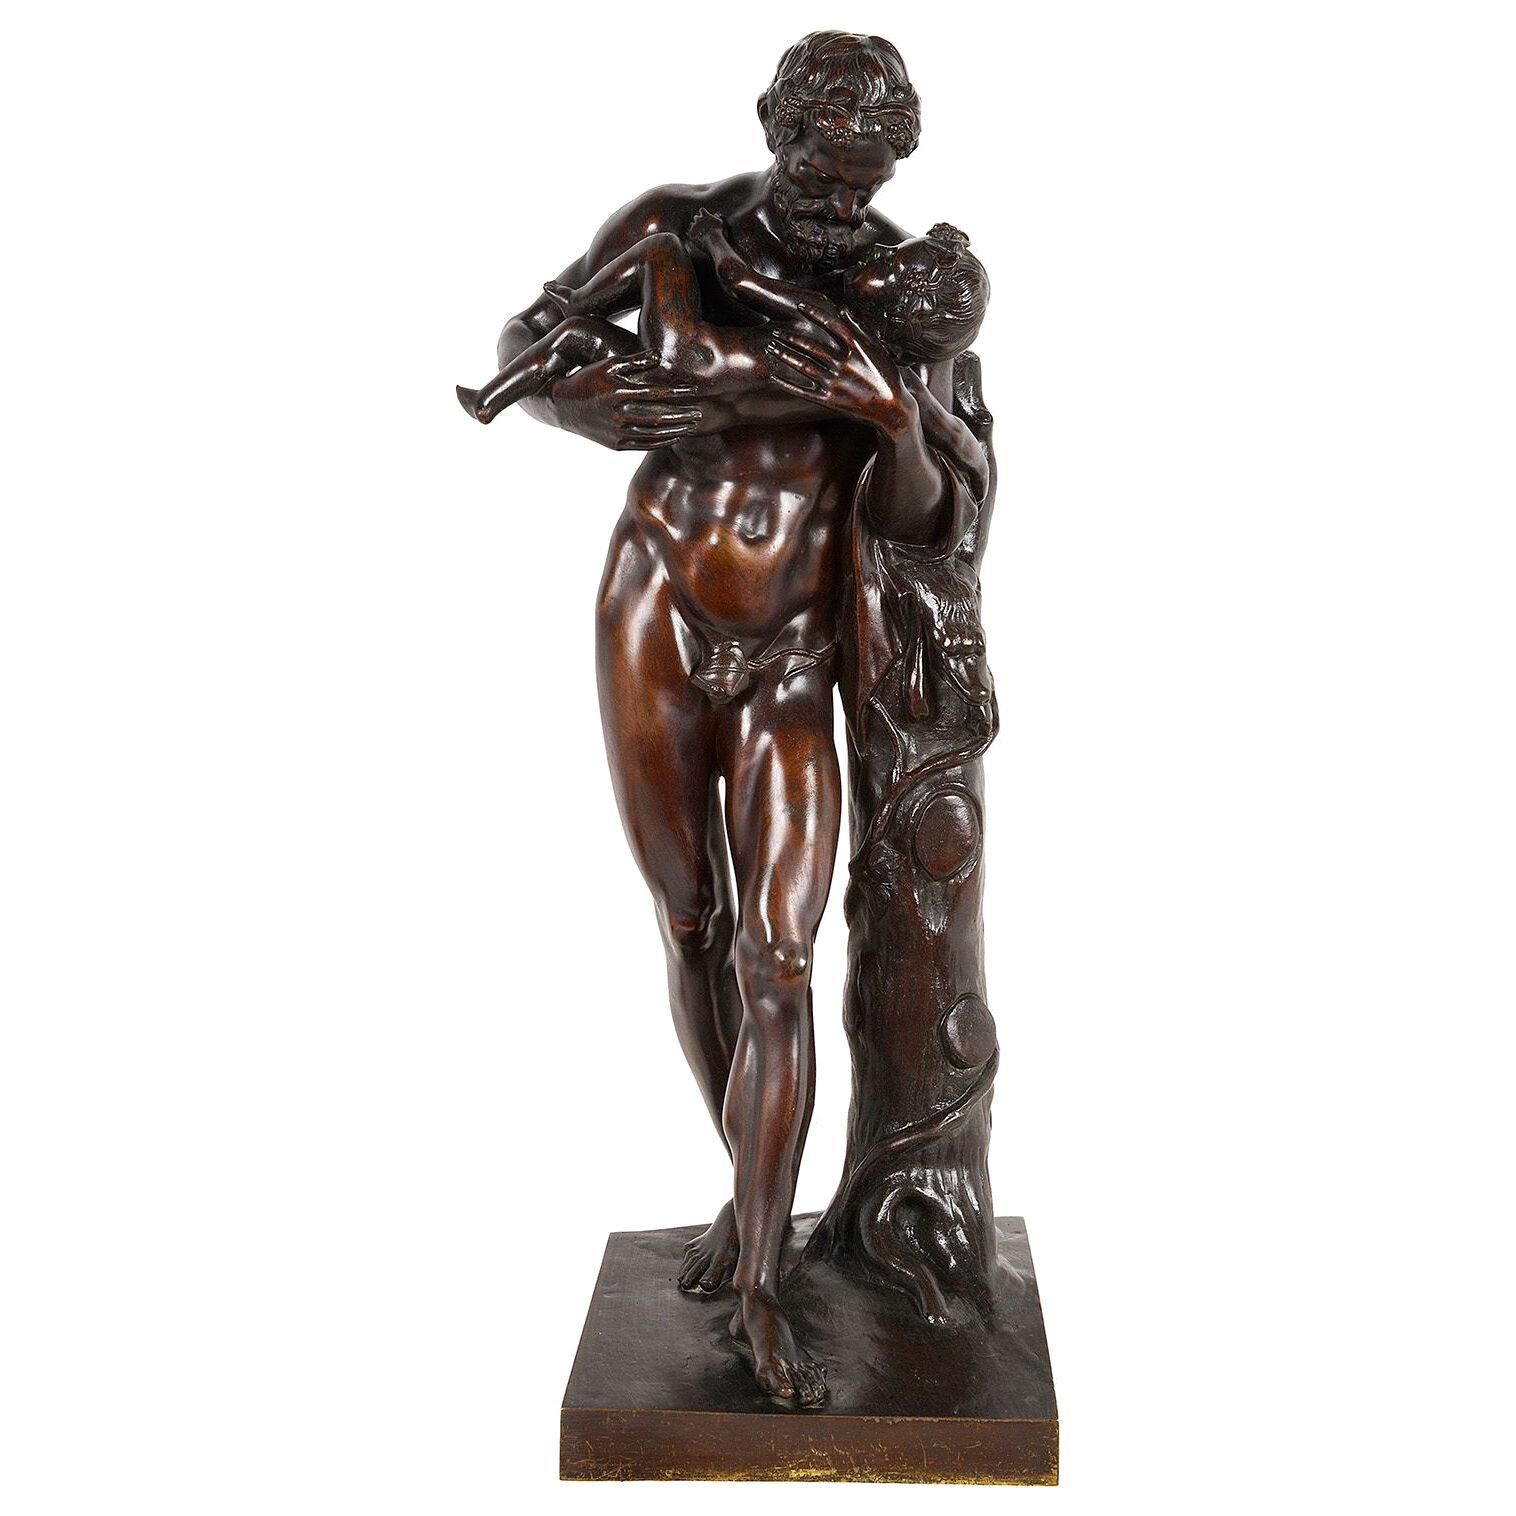 A Grand tour 19th Century Bronze statue of Silenus cradling the infant Dionysus.